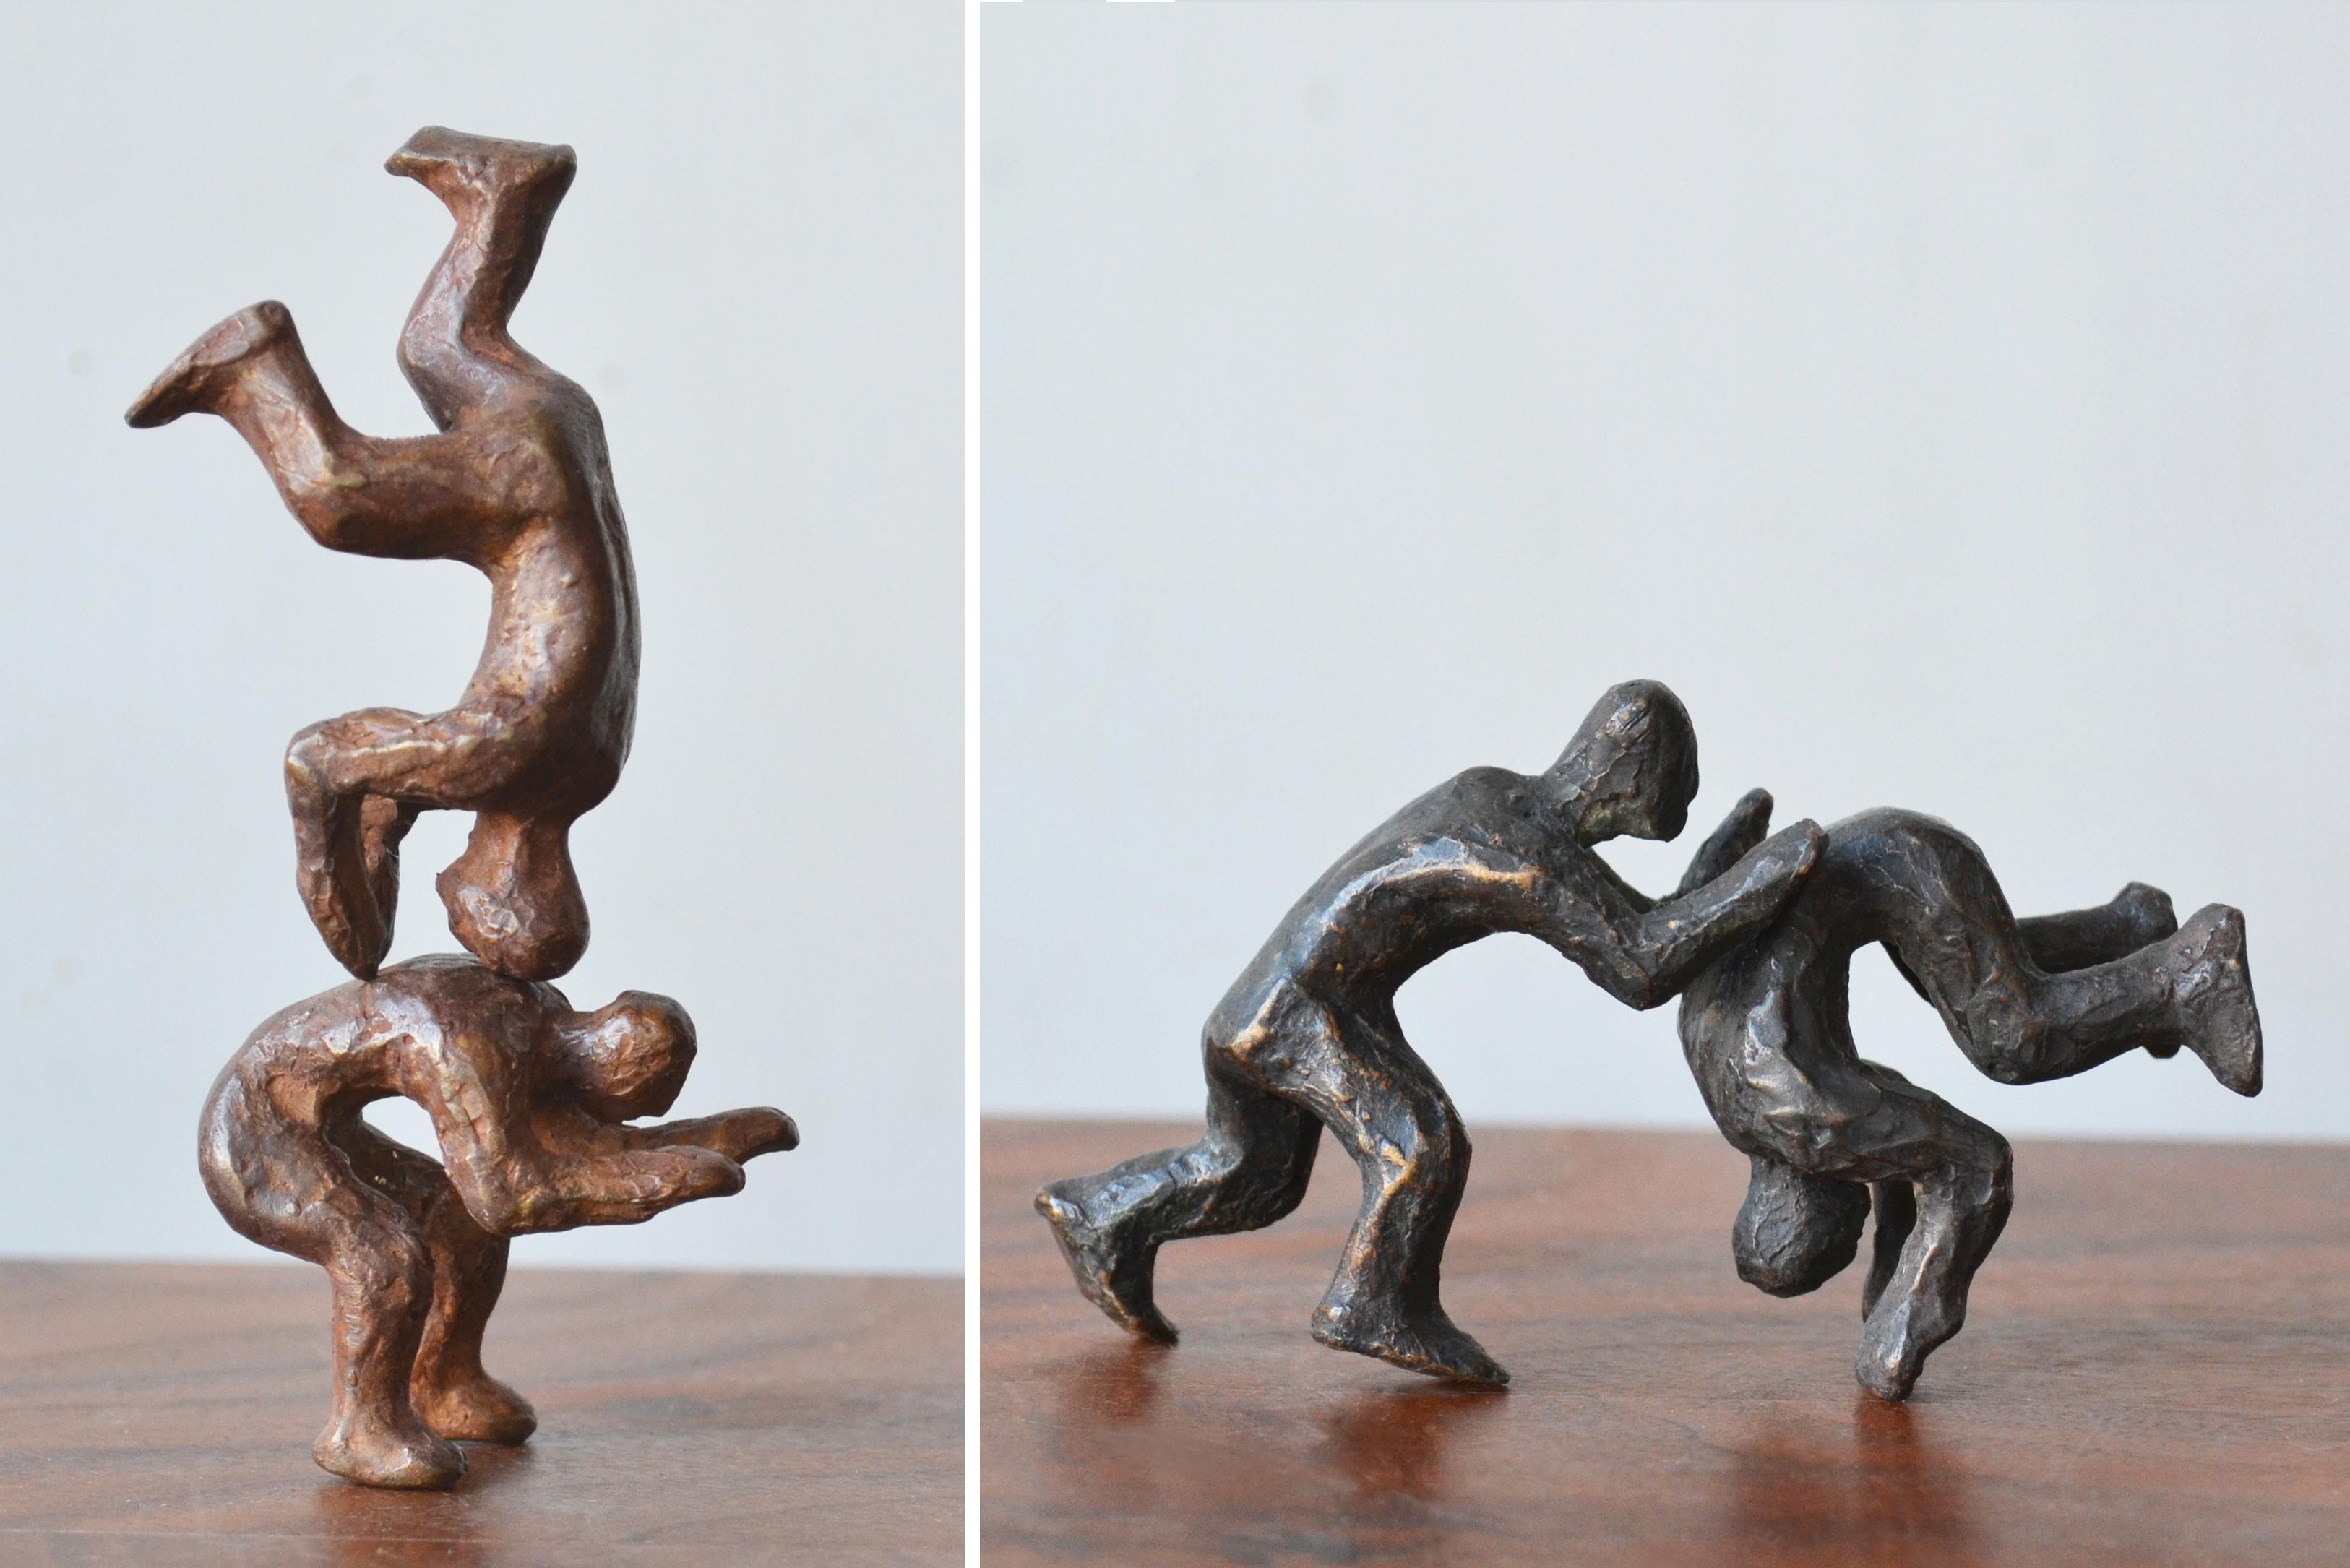 Noa Bornstein Figurative Sculpture - "Why Fight When You Can Play?" 3 pairs of interactive bronze figures